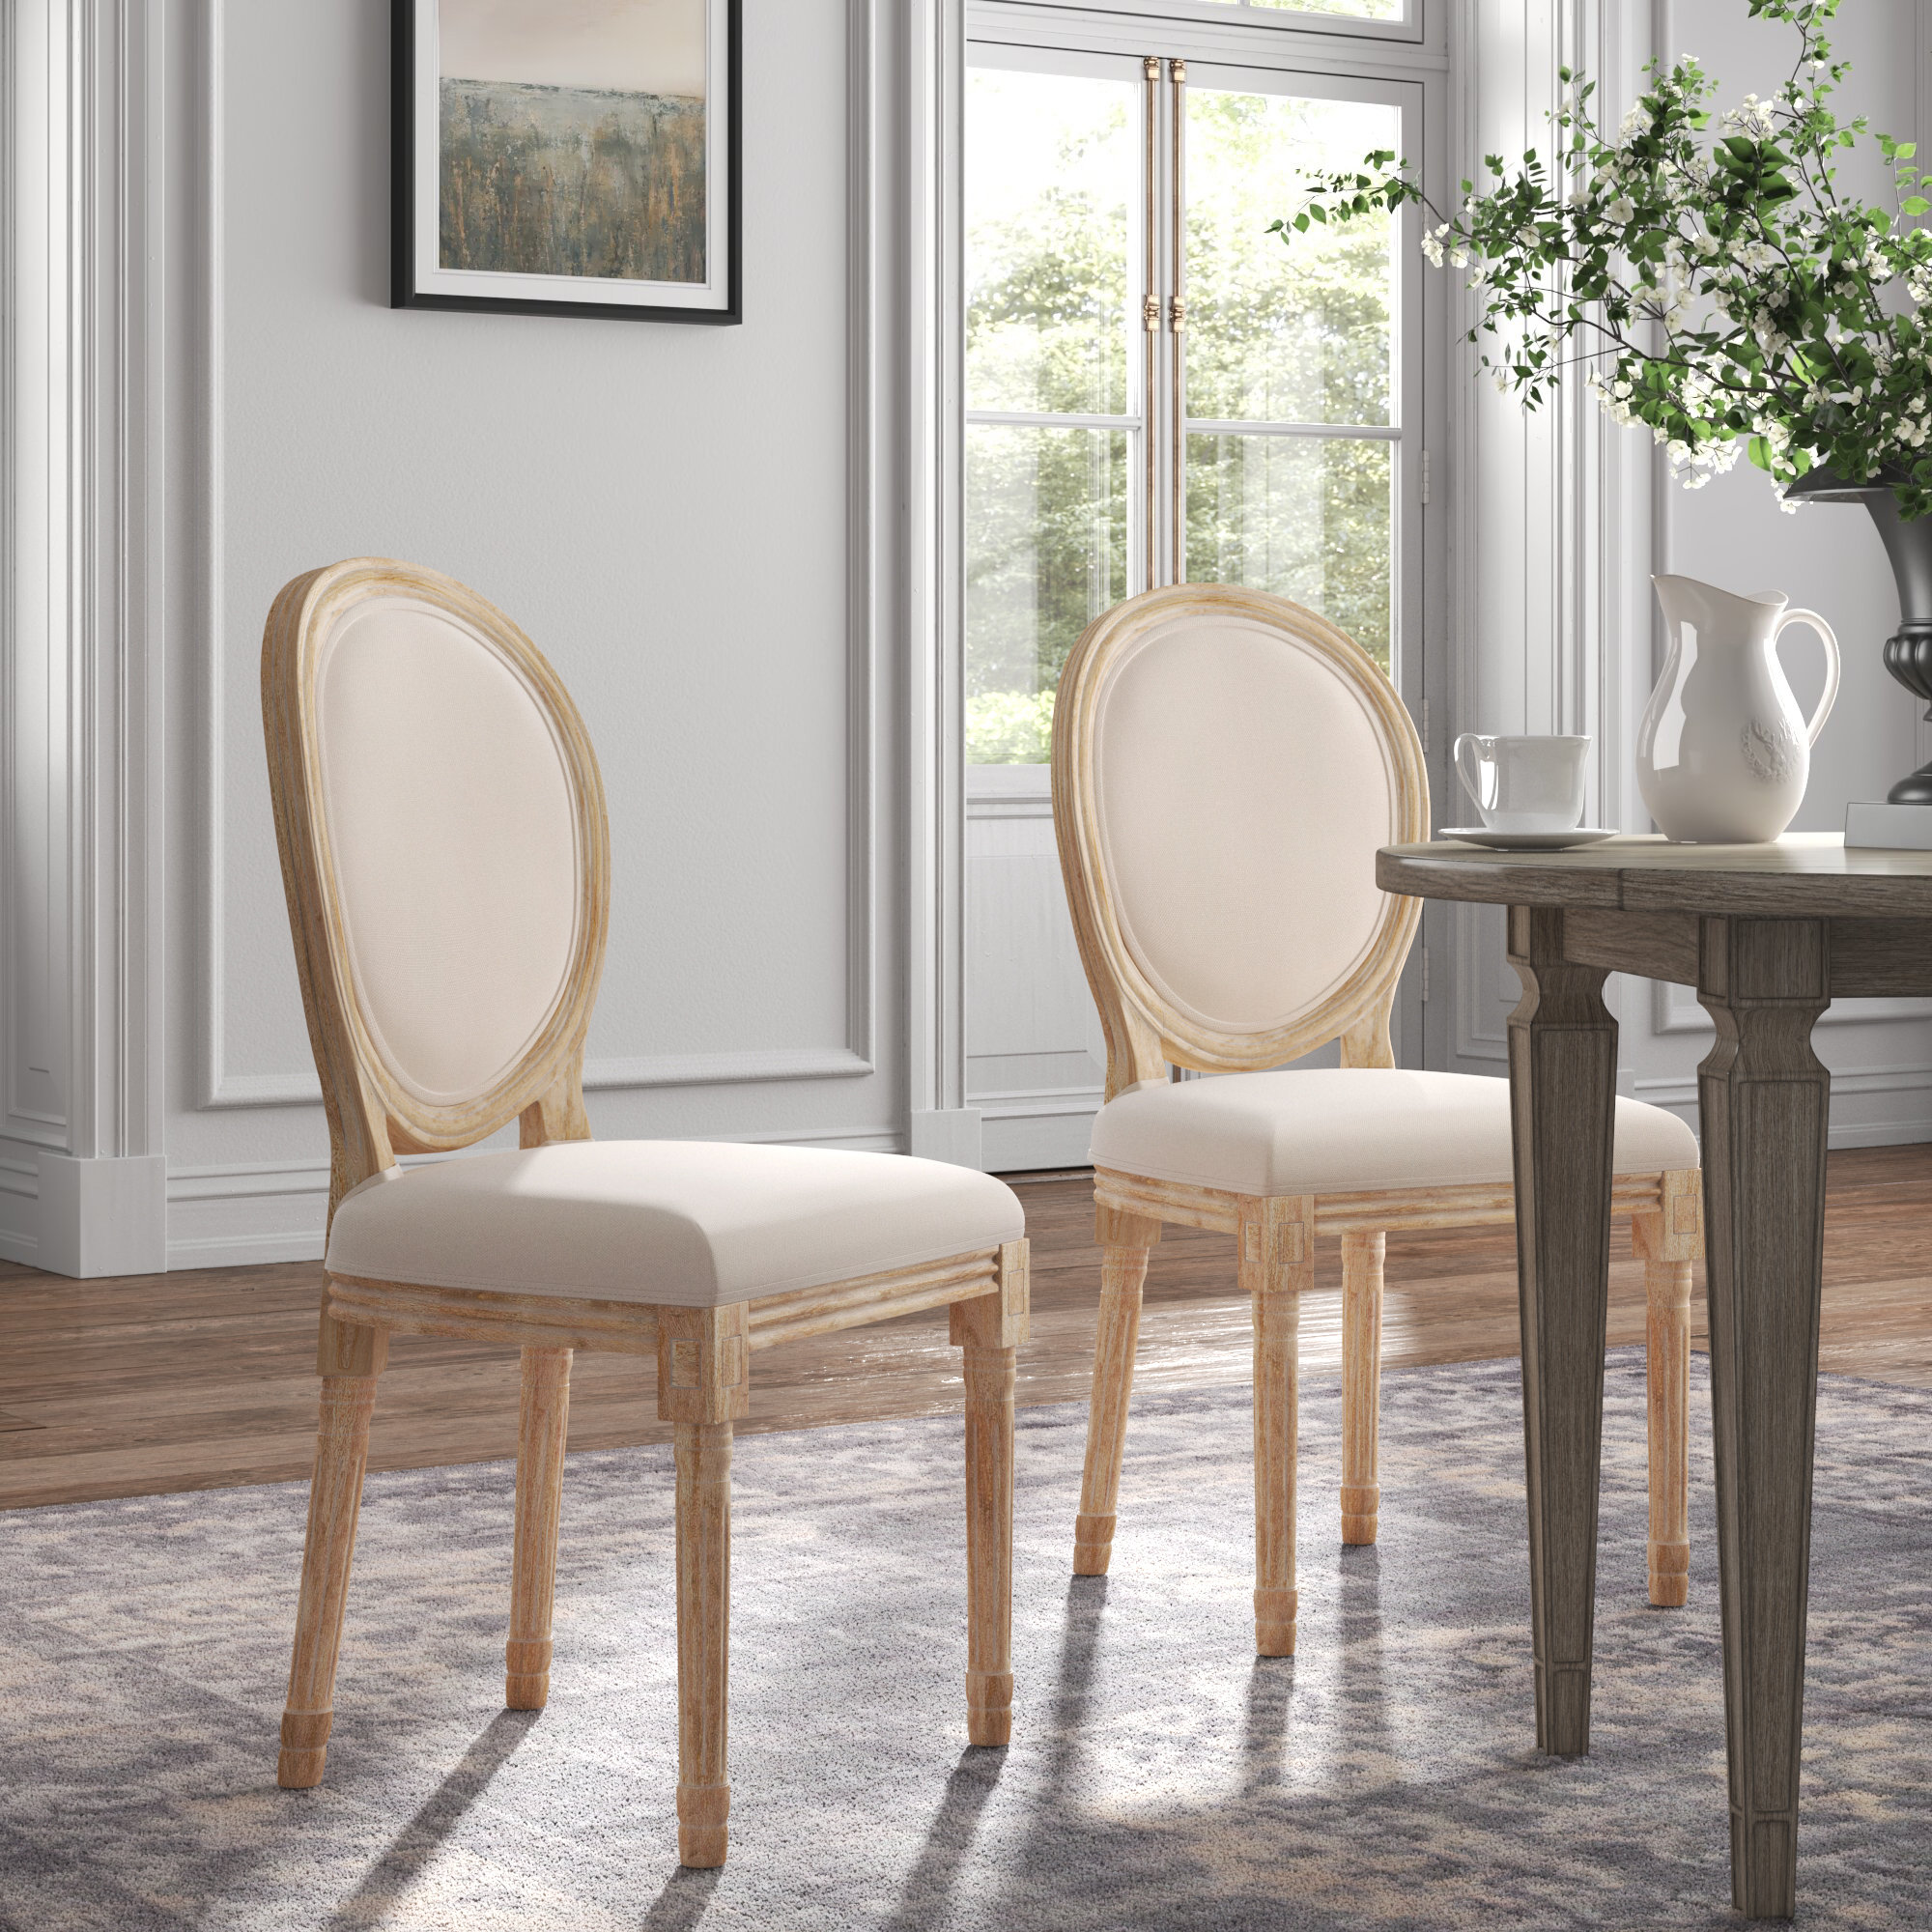 King Louis XVI Dining Chair, White Chair with Clear Back, Solid Wood Frame  - Royal Luxury Events